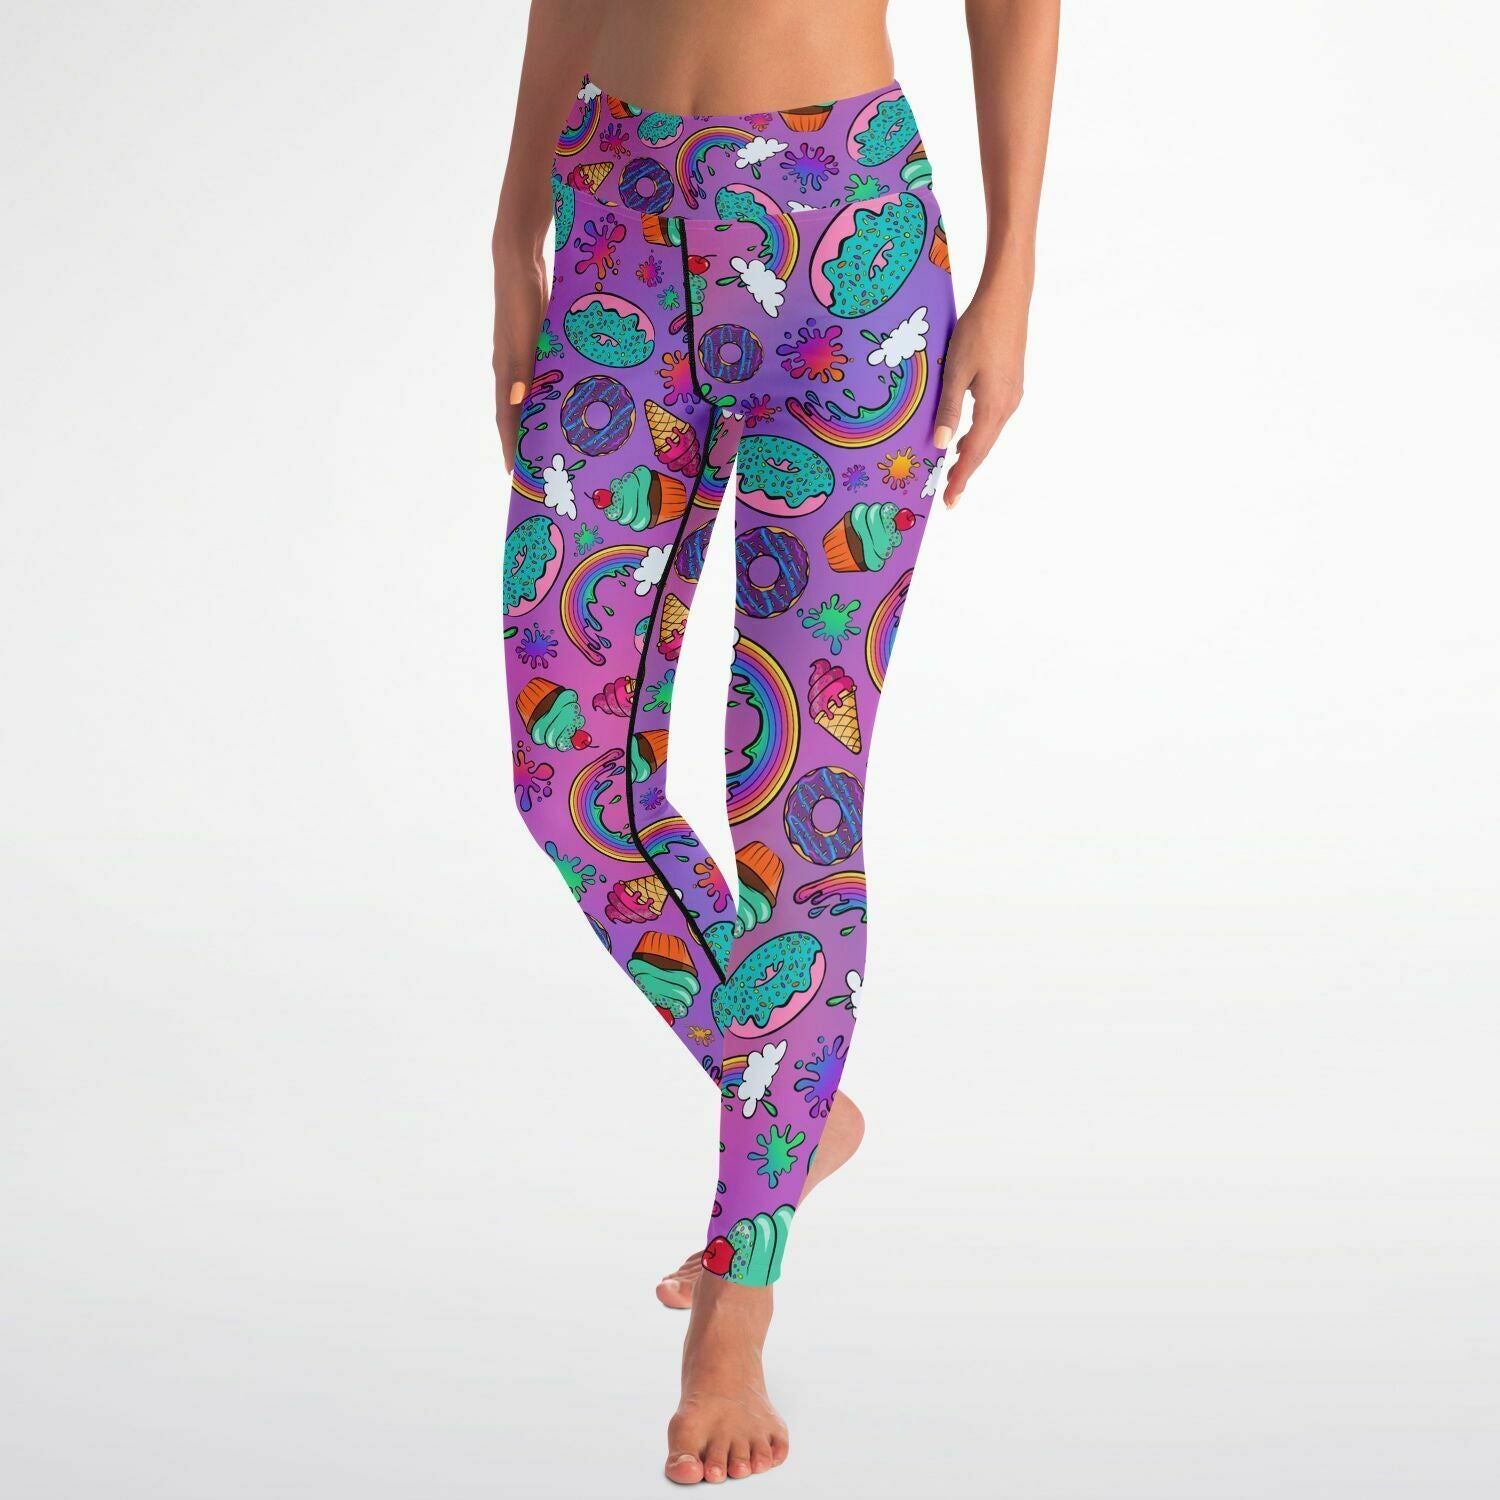 Fun Colourful Yoga leggings for Face Painters and entertainers